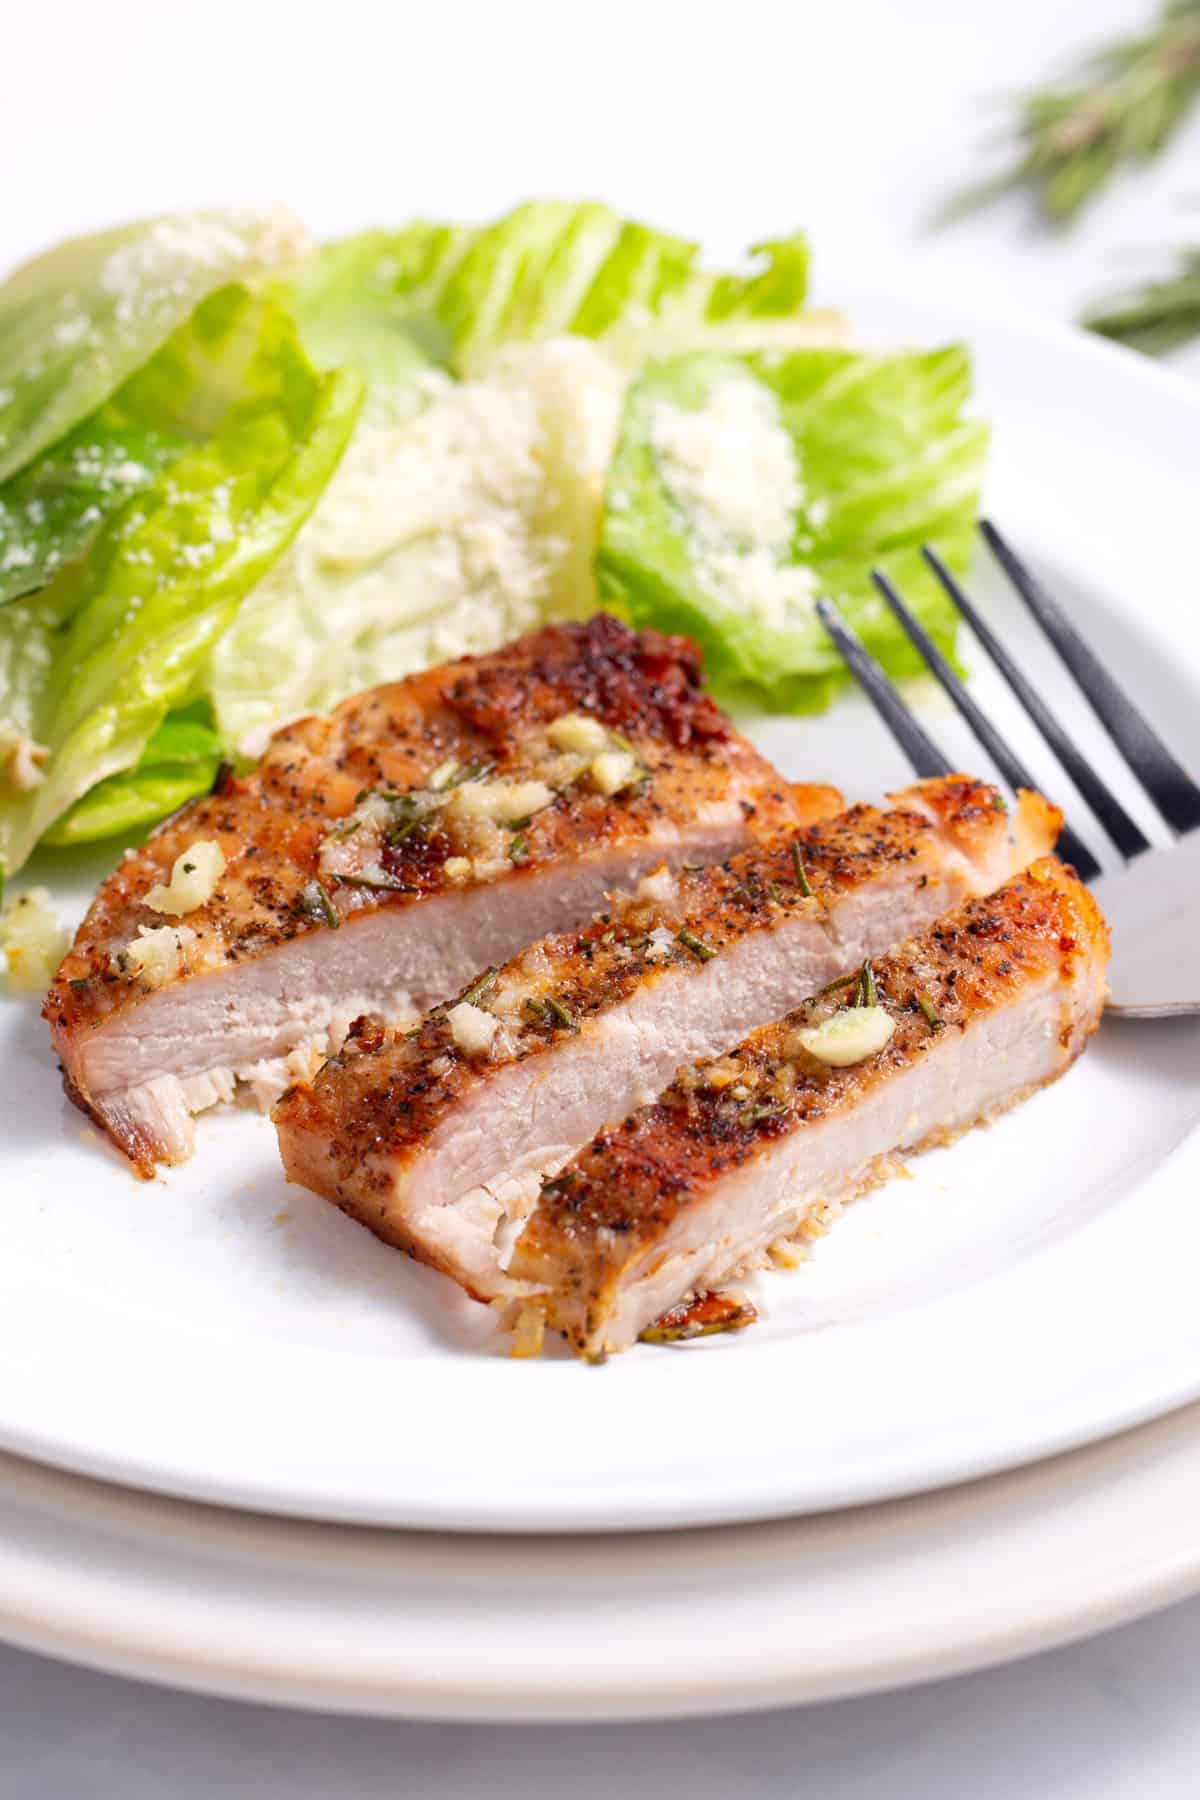 baked pork chop sliced and served on a white round plate with a side salad